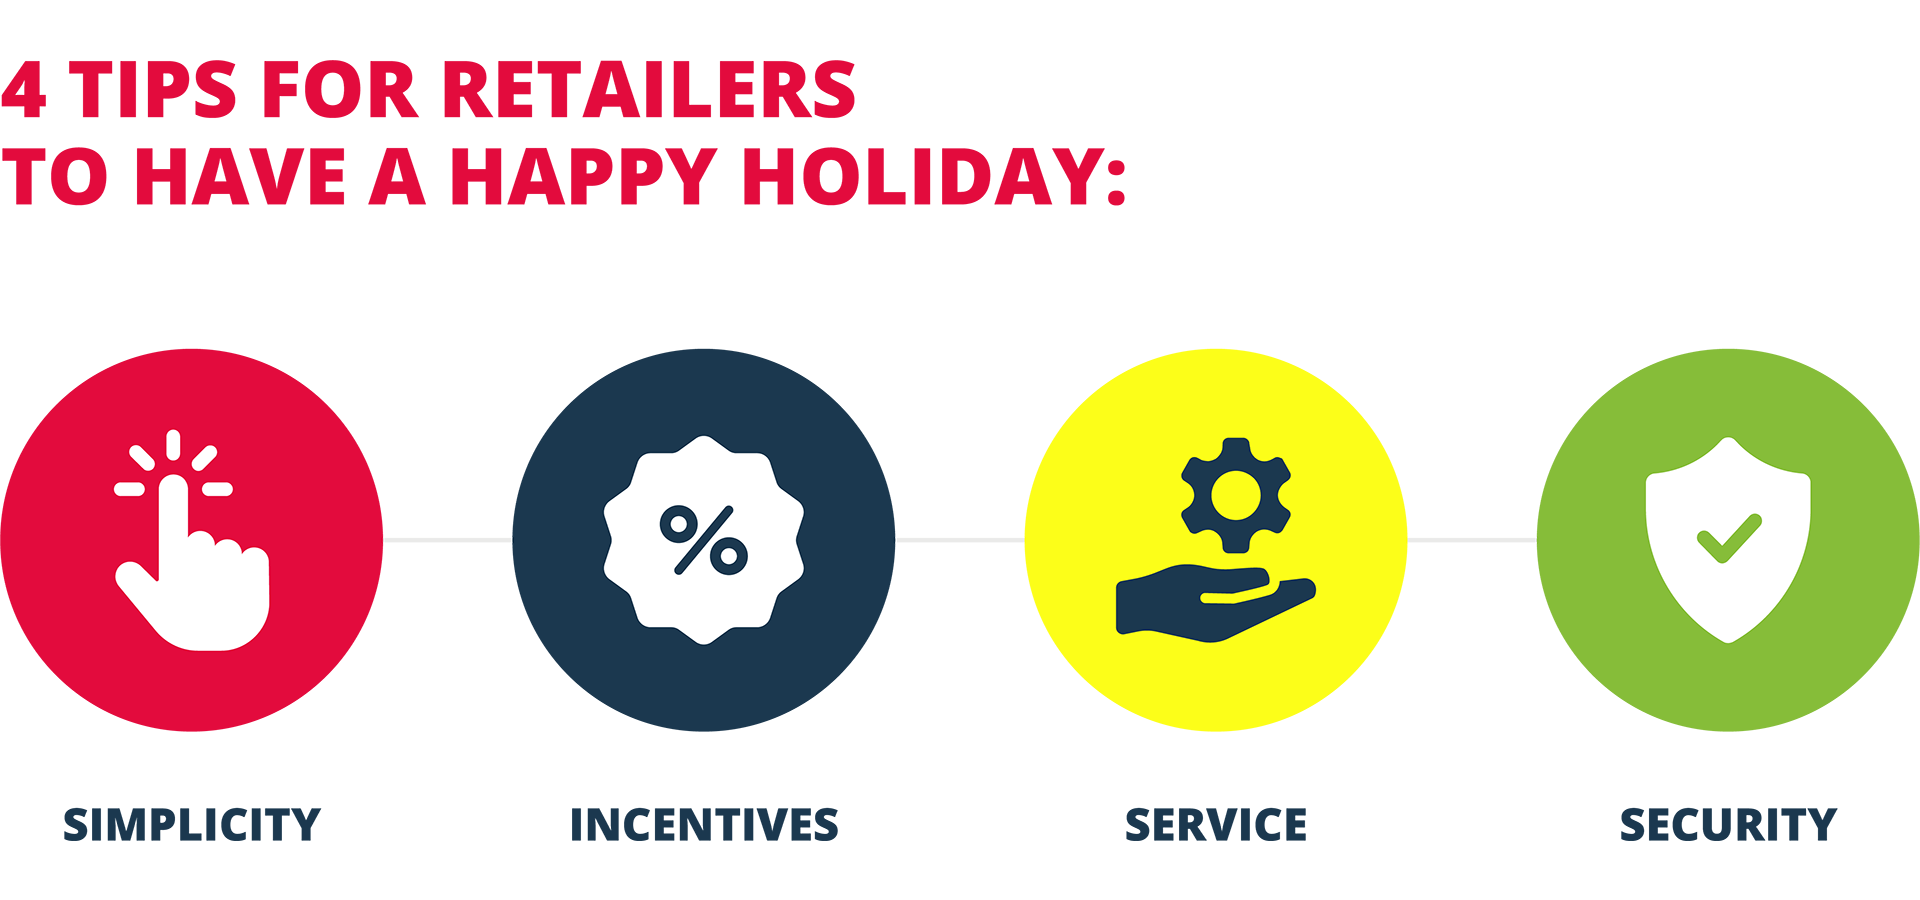 4 TIPS FOR RETAILERS TO HAVE A HAPPY HOLIDAY: